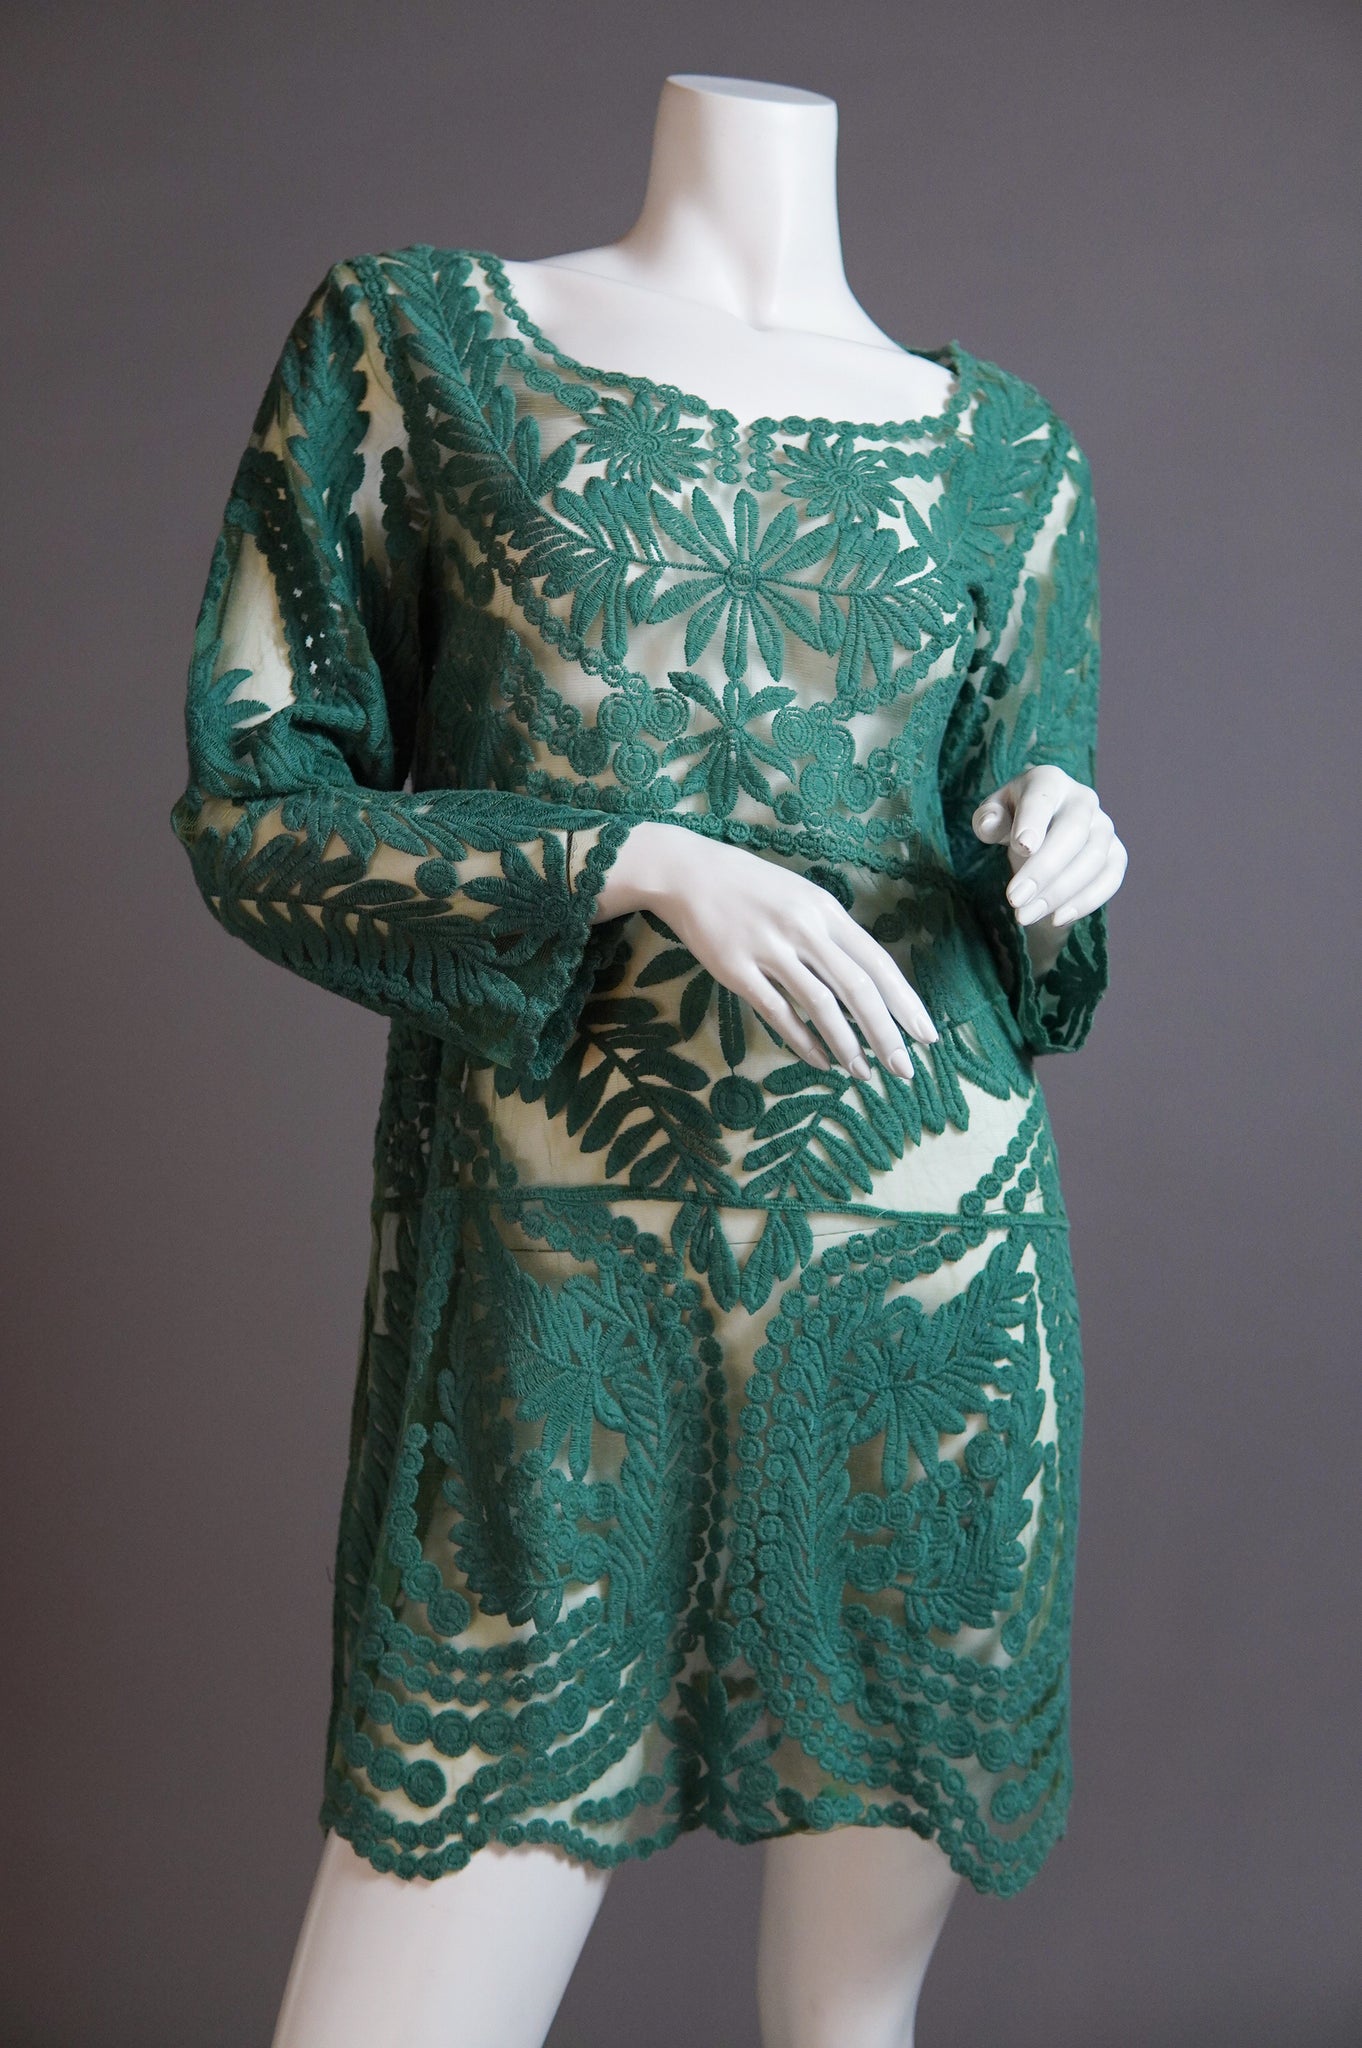 1970s shift dress with hand-embroidered design on mesh - XS/S/M